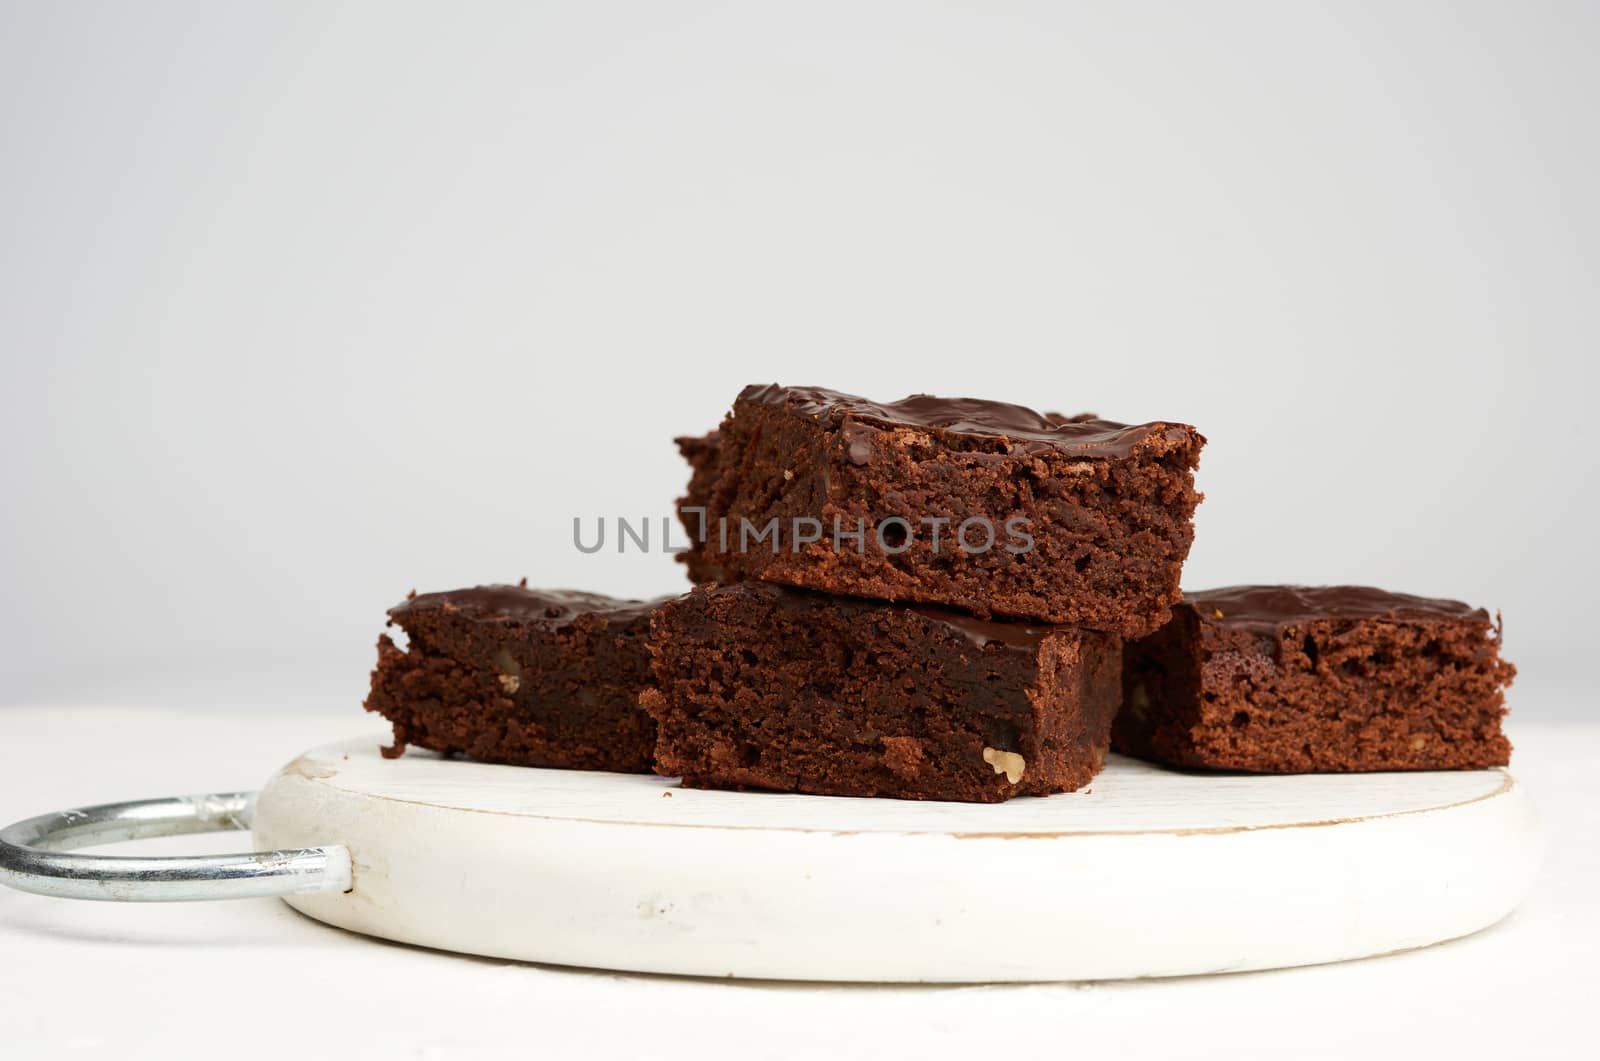 stack of square baked slices of brownie chocolate cake with walnuts on a round white wooden board, close up